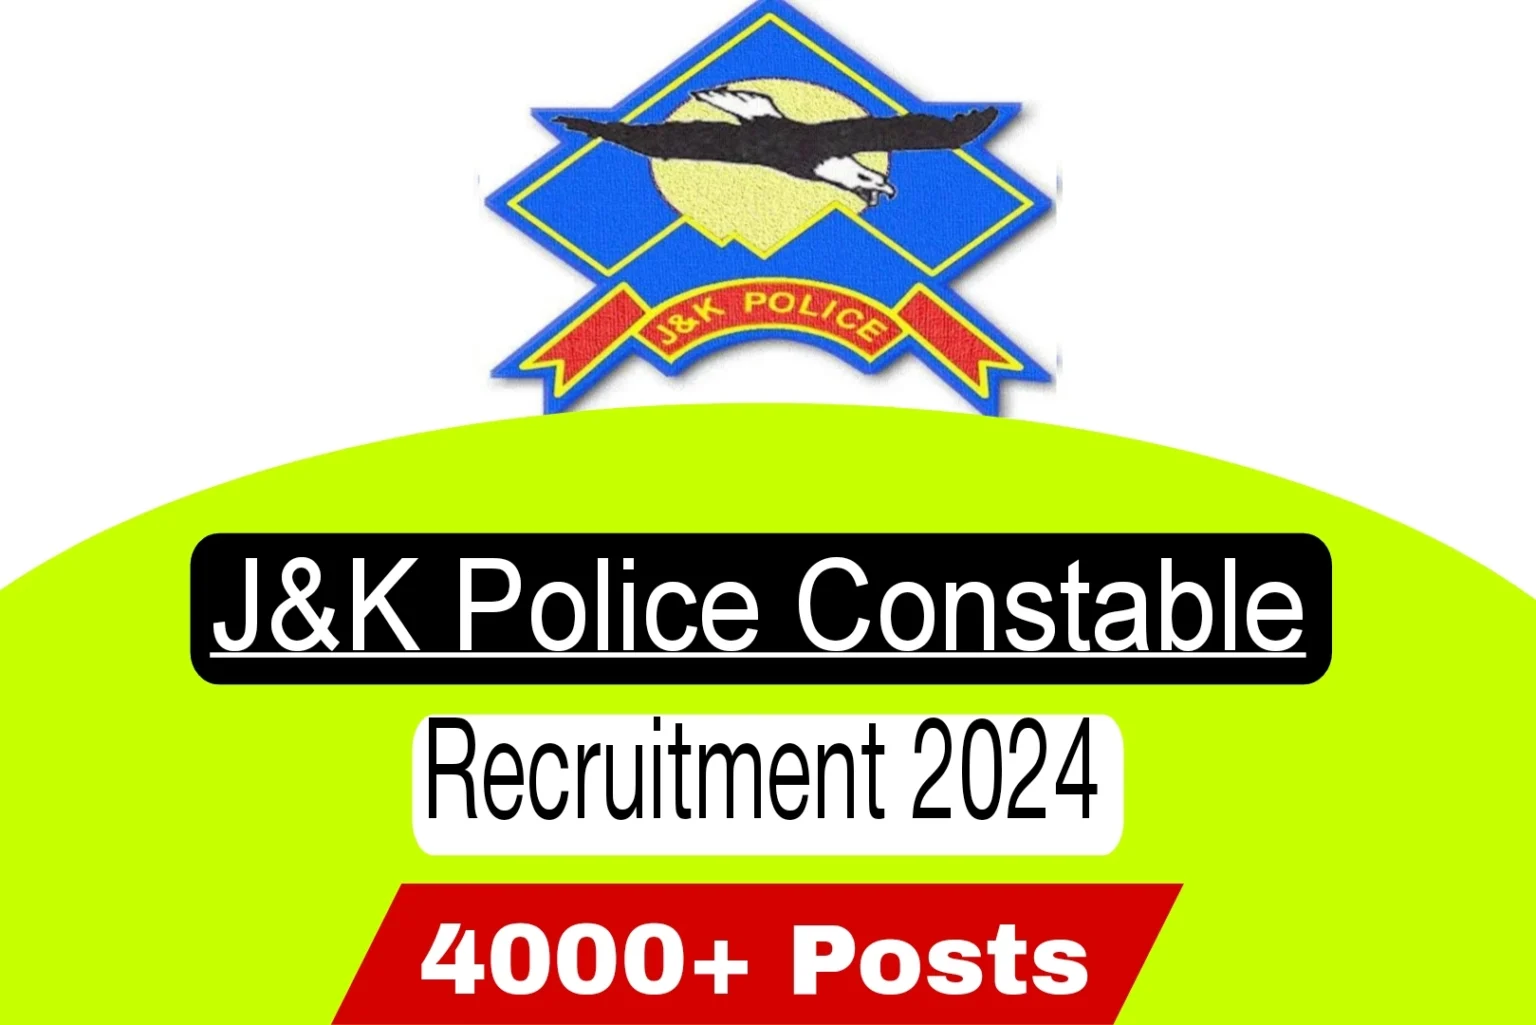 JK Police Constable Vacancy 2024, Application Form, Start Date, Age Limit, Syllabus